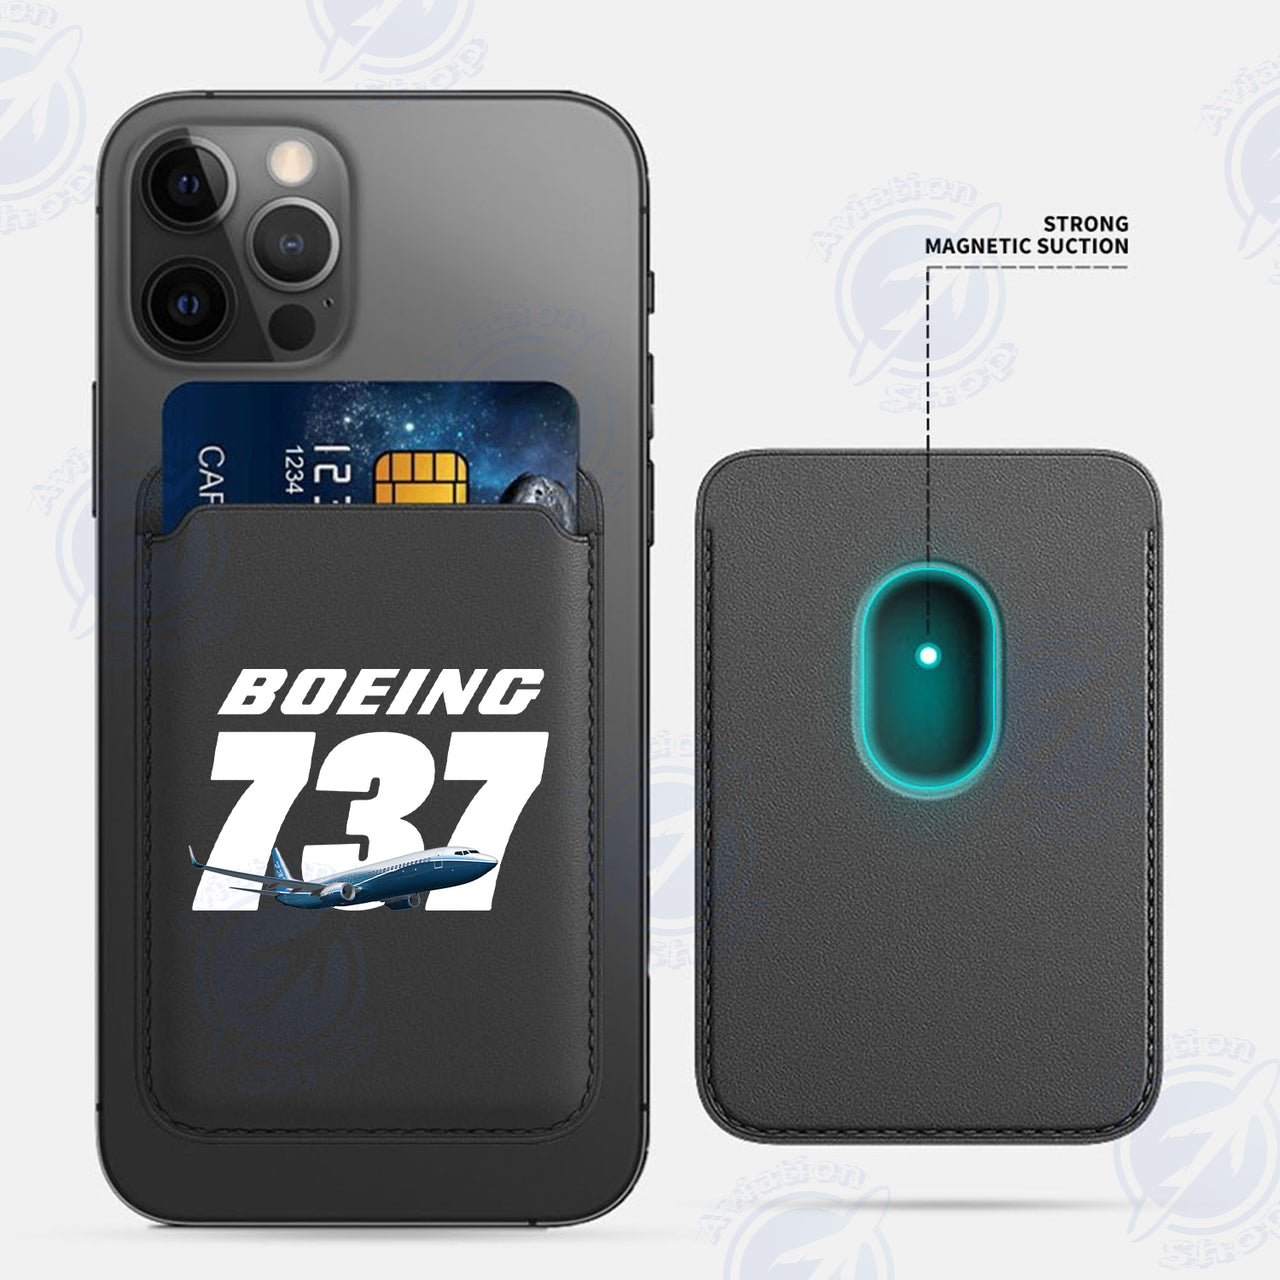 Super Boeing 737+Text iPhone Cases Magnetic Card Wallet